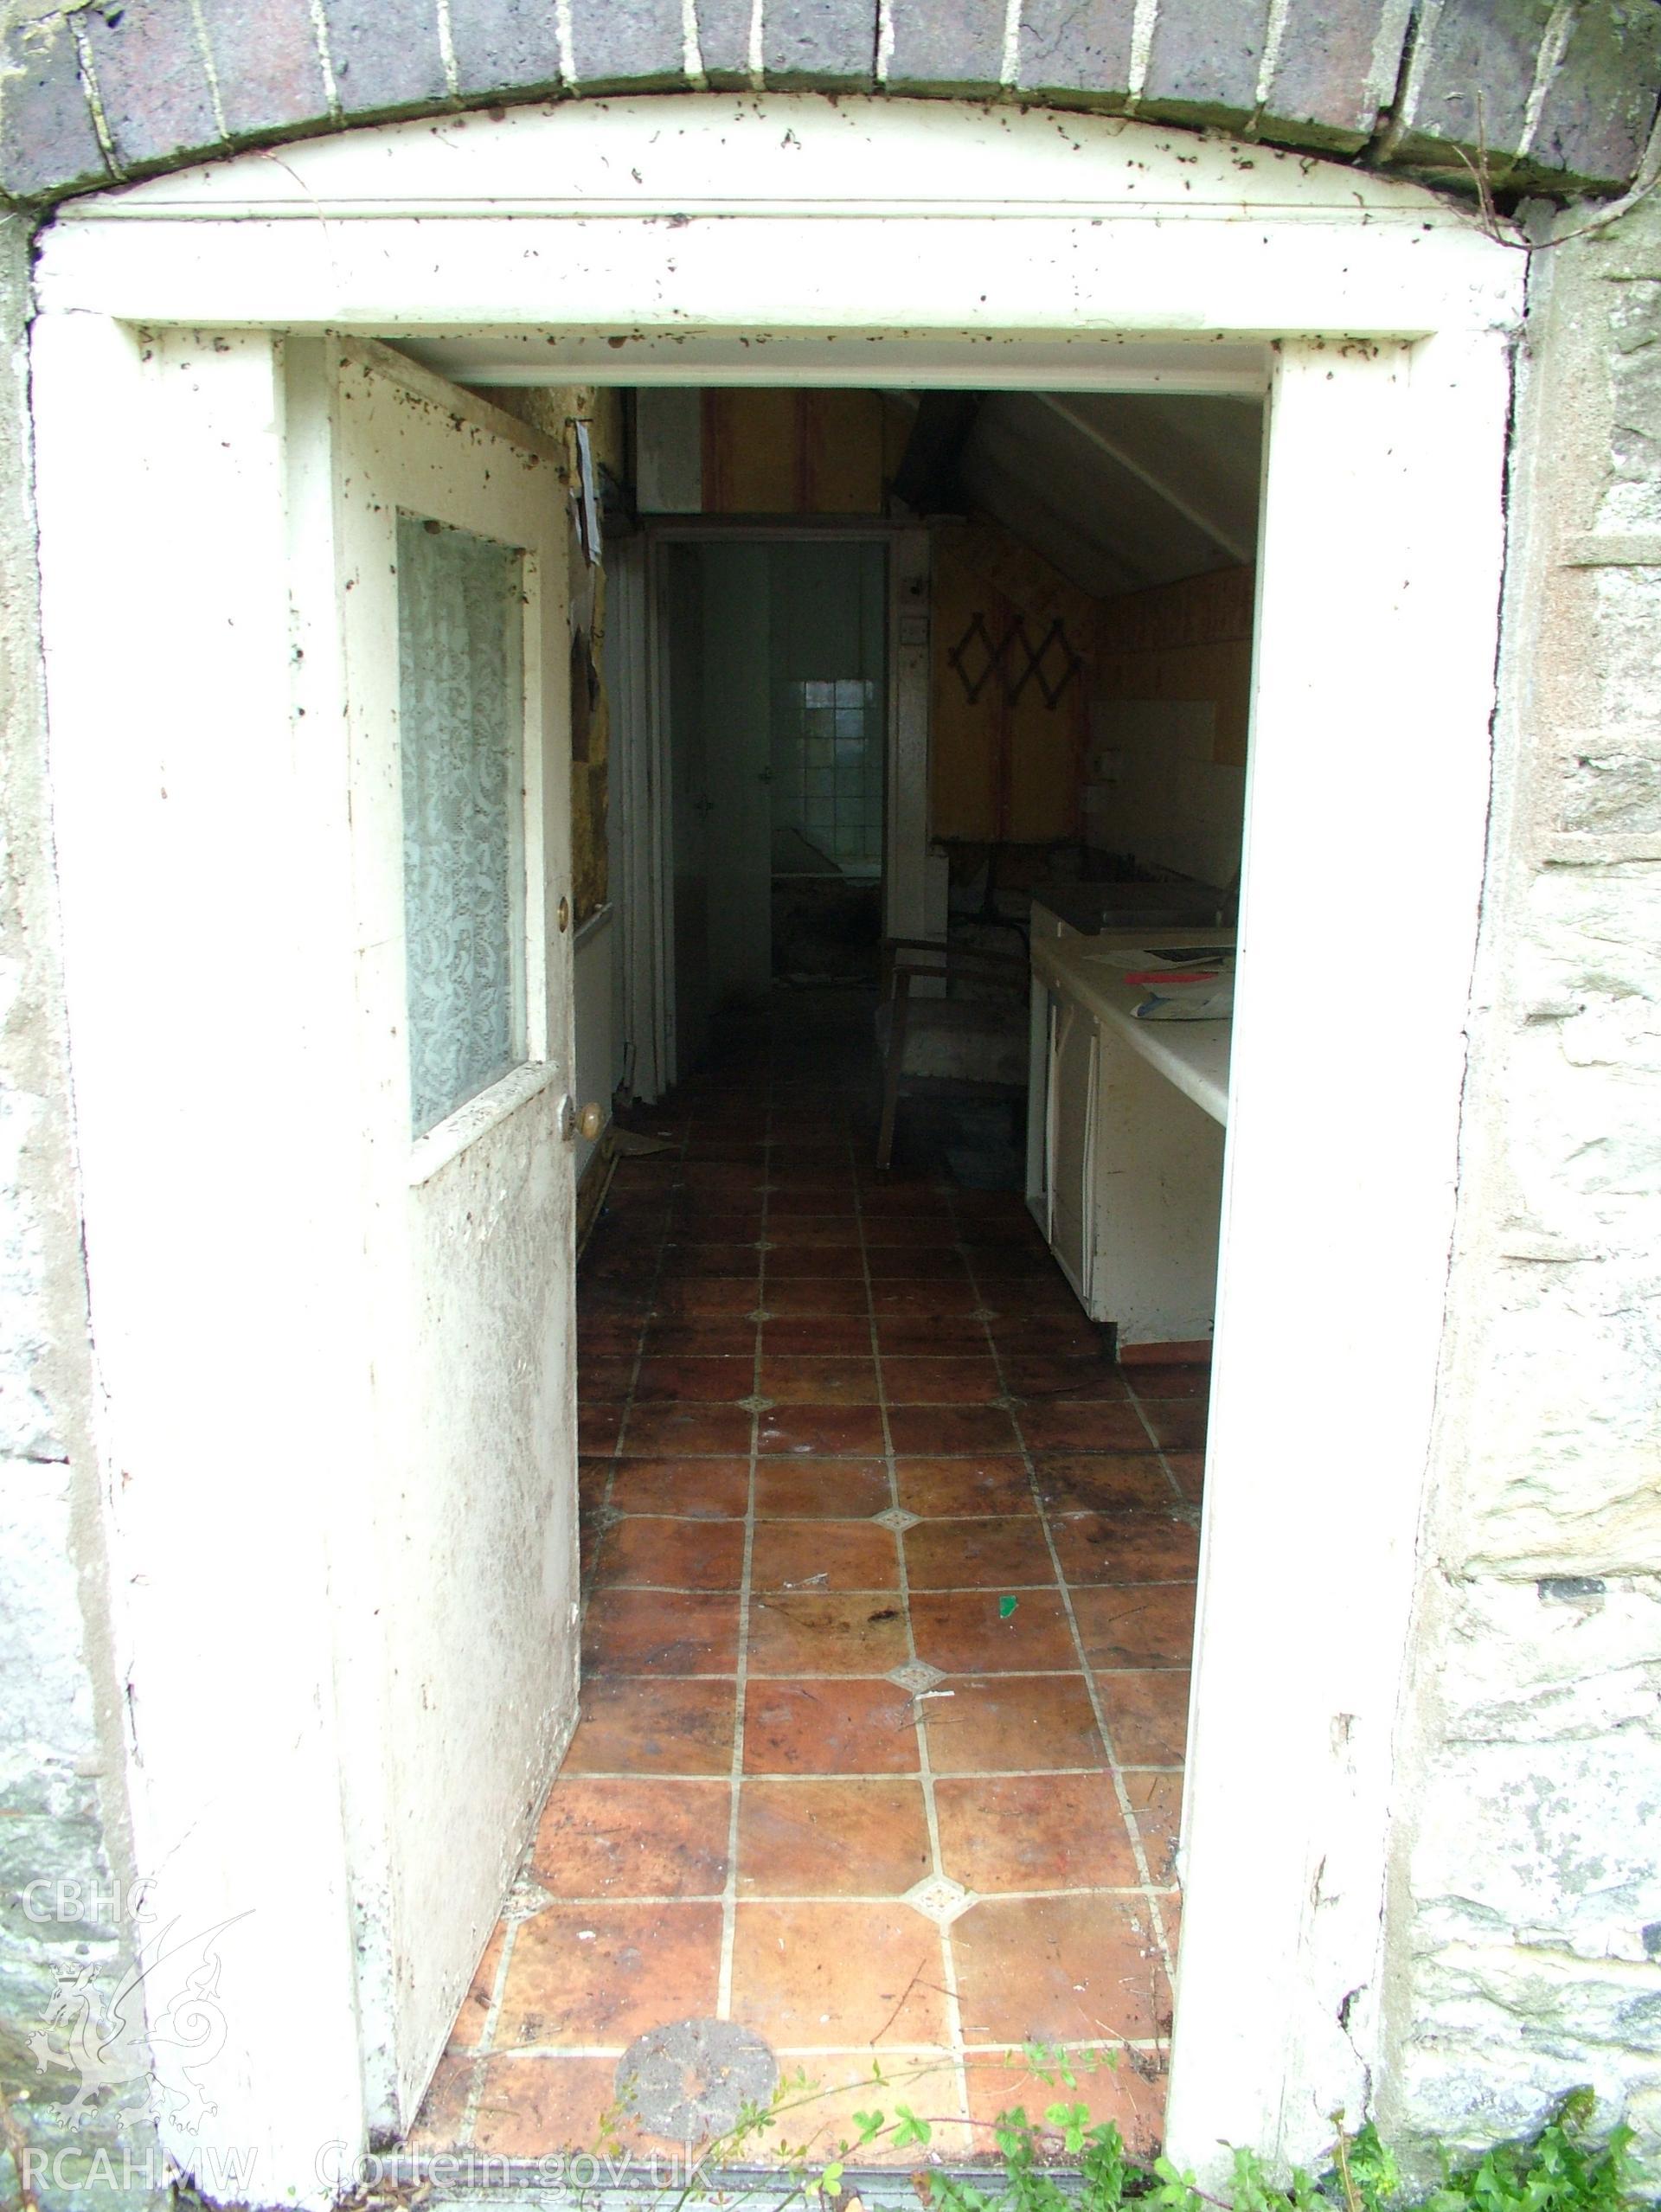 Digital colour photograph showing Llwynypandy chapel house - view of extension doorway